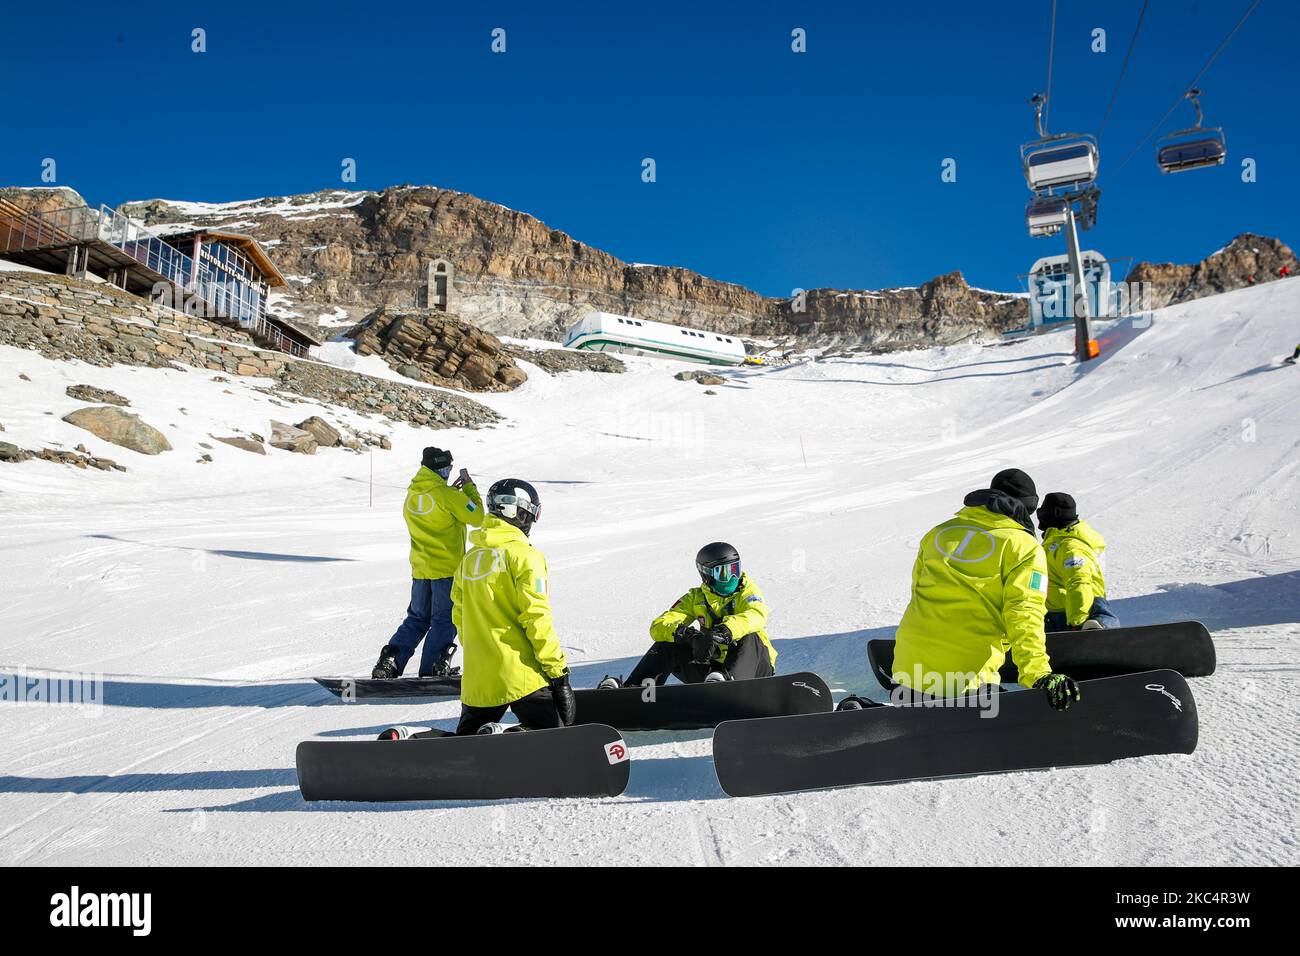 27/11/2020 Cervinia, Italy: The Italian Paralympic team of snowboard during his training in a competitive season full of uncertainties due to the spread of Covid-19 pandemic. Cervinia alpine ski resort is the only winter resort open to ski training in the northwest of Italy. The Plan Maison (m. 2.500 MSL. ) slopes are reserve only for the professional teams, but now with the decision to keep the slopes closed for tourists during the Christmas holidays, the property of the ski resort has announced that it does not know how long it will be able to remain open with so little income. The lack of s Stock Photo